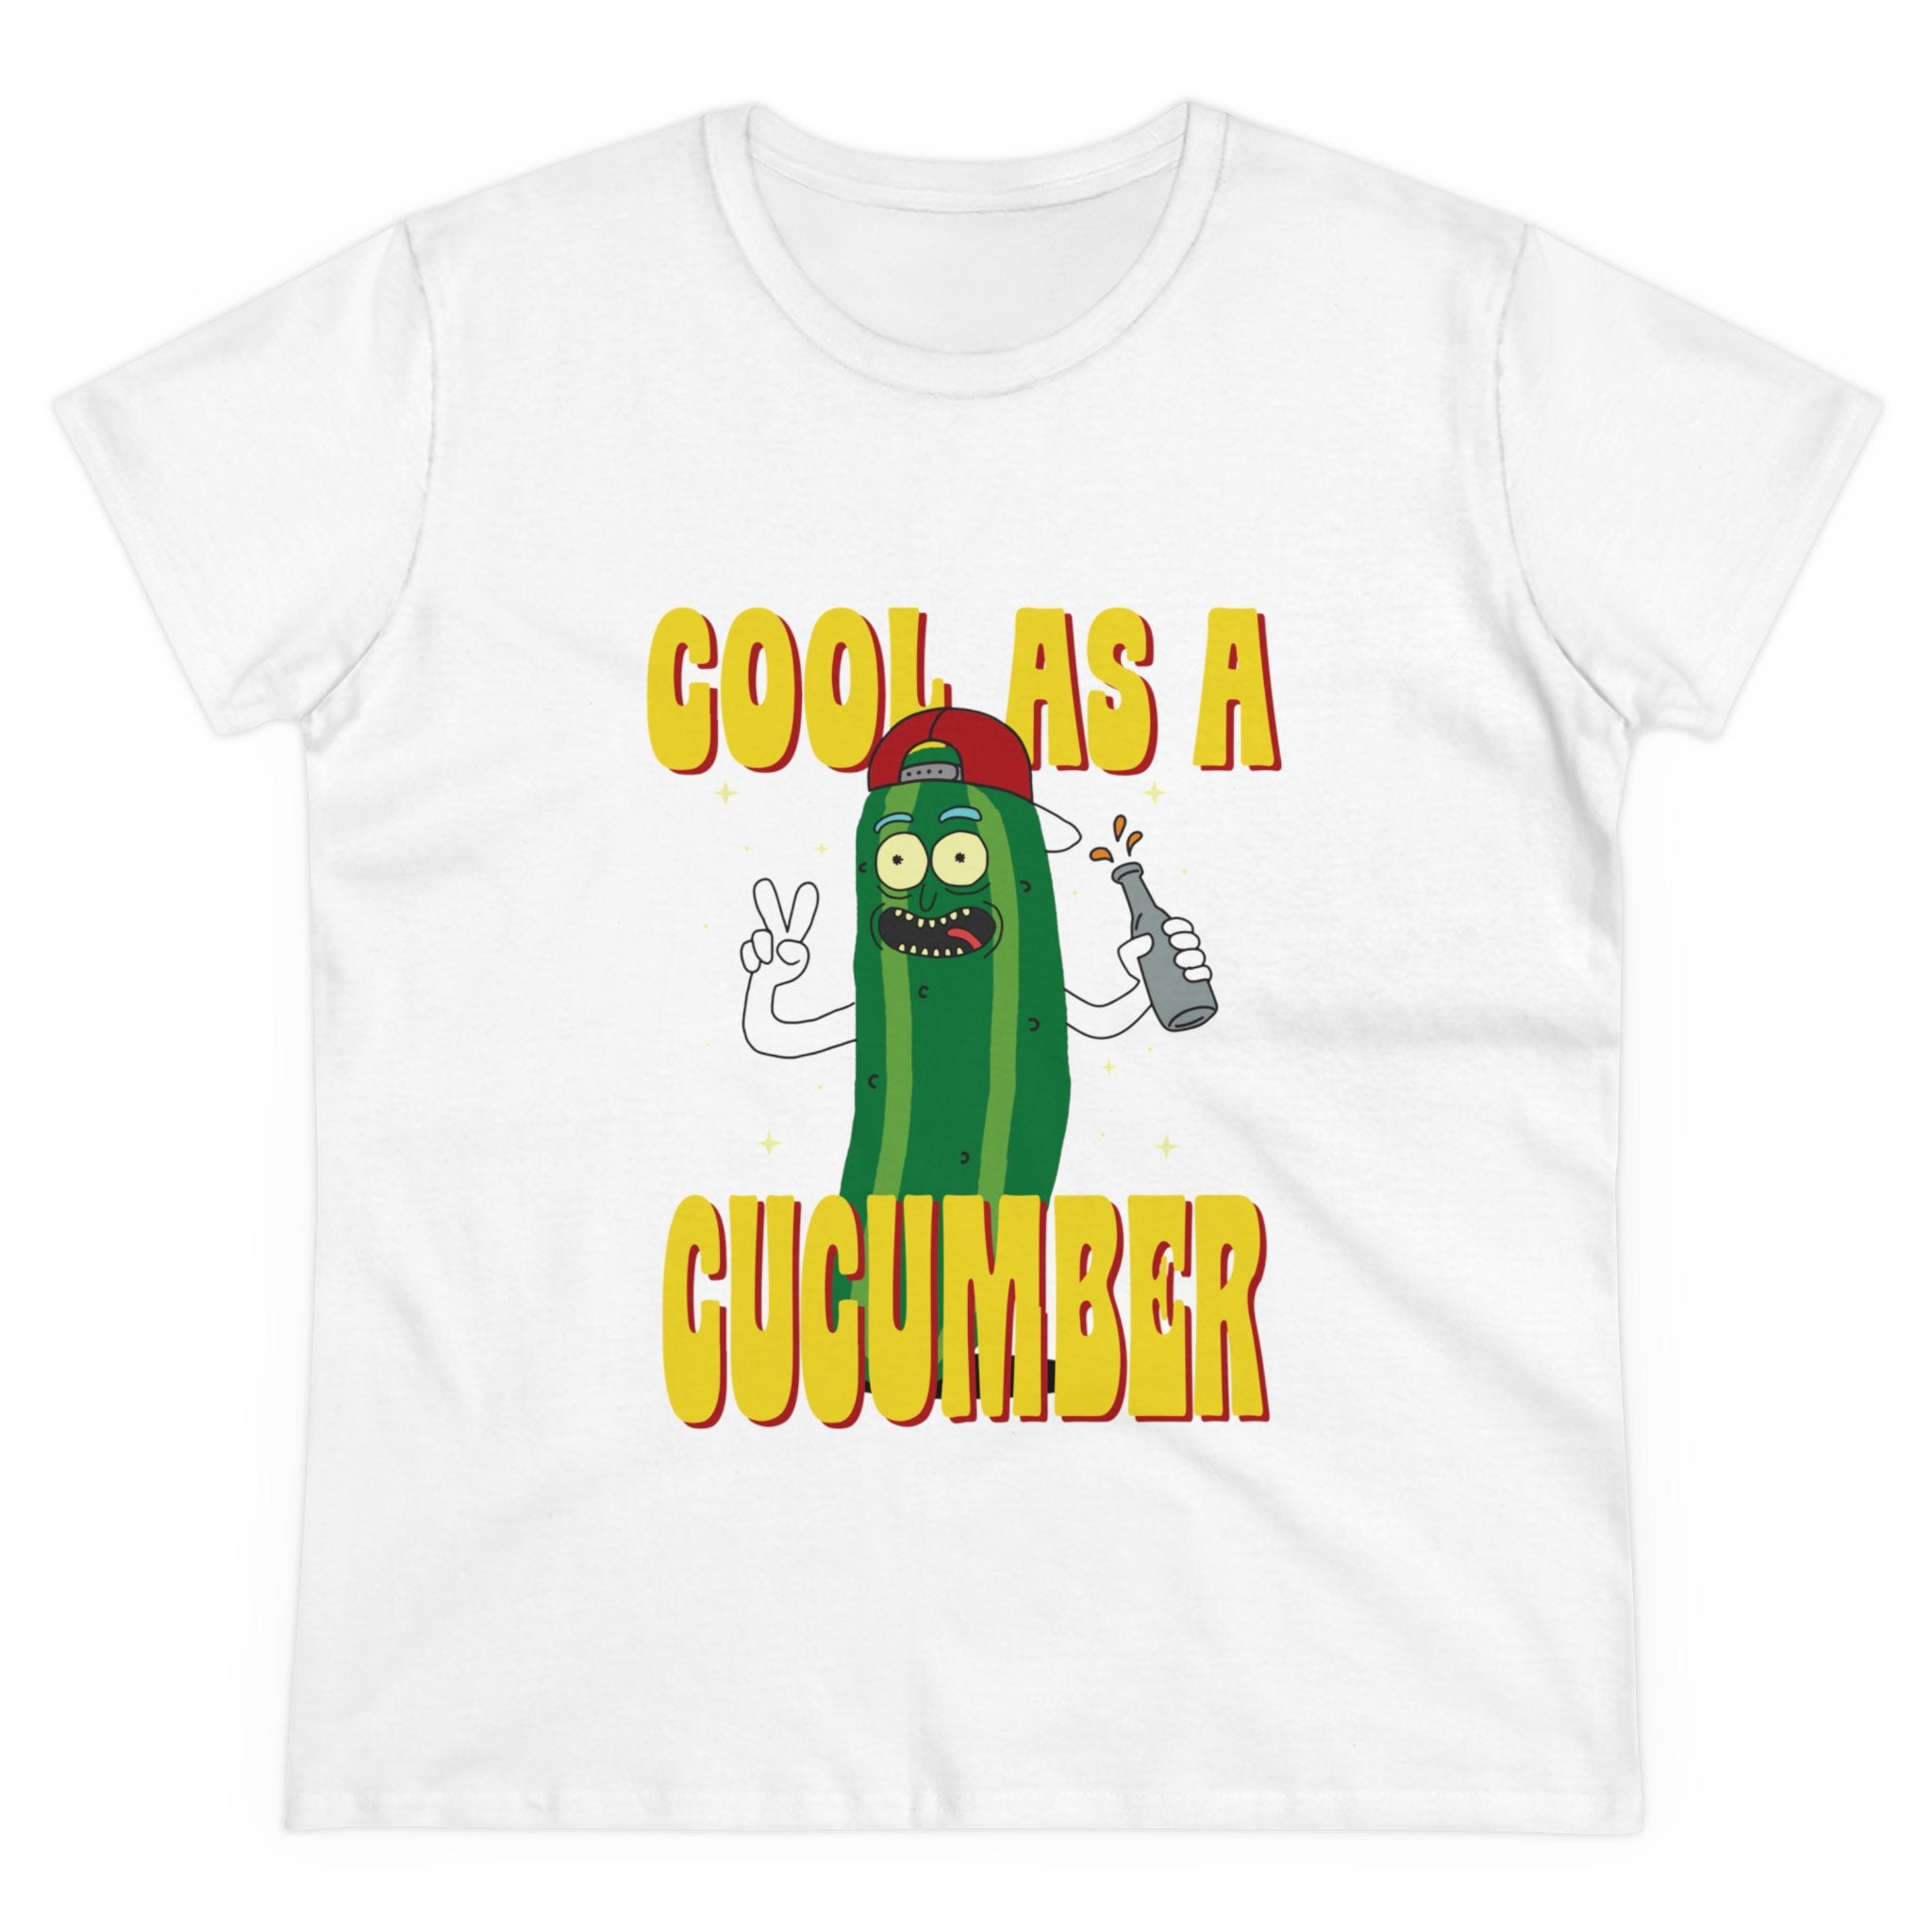 Cool as Cucumber - Women's Tee made of pre-shrunk cotton, featuring a cartoon pickle in a red hat, holding a spray can, giving a peace sign. "Cool as a Cucumber" is displayed in bold yellow letters on this comfy women's tee with a semi-fitted silhouette.